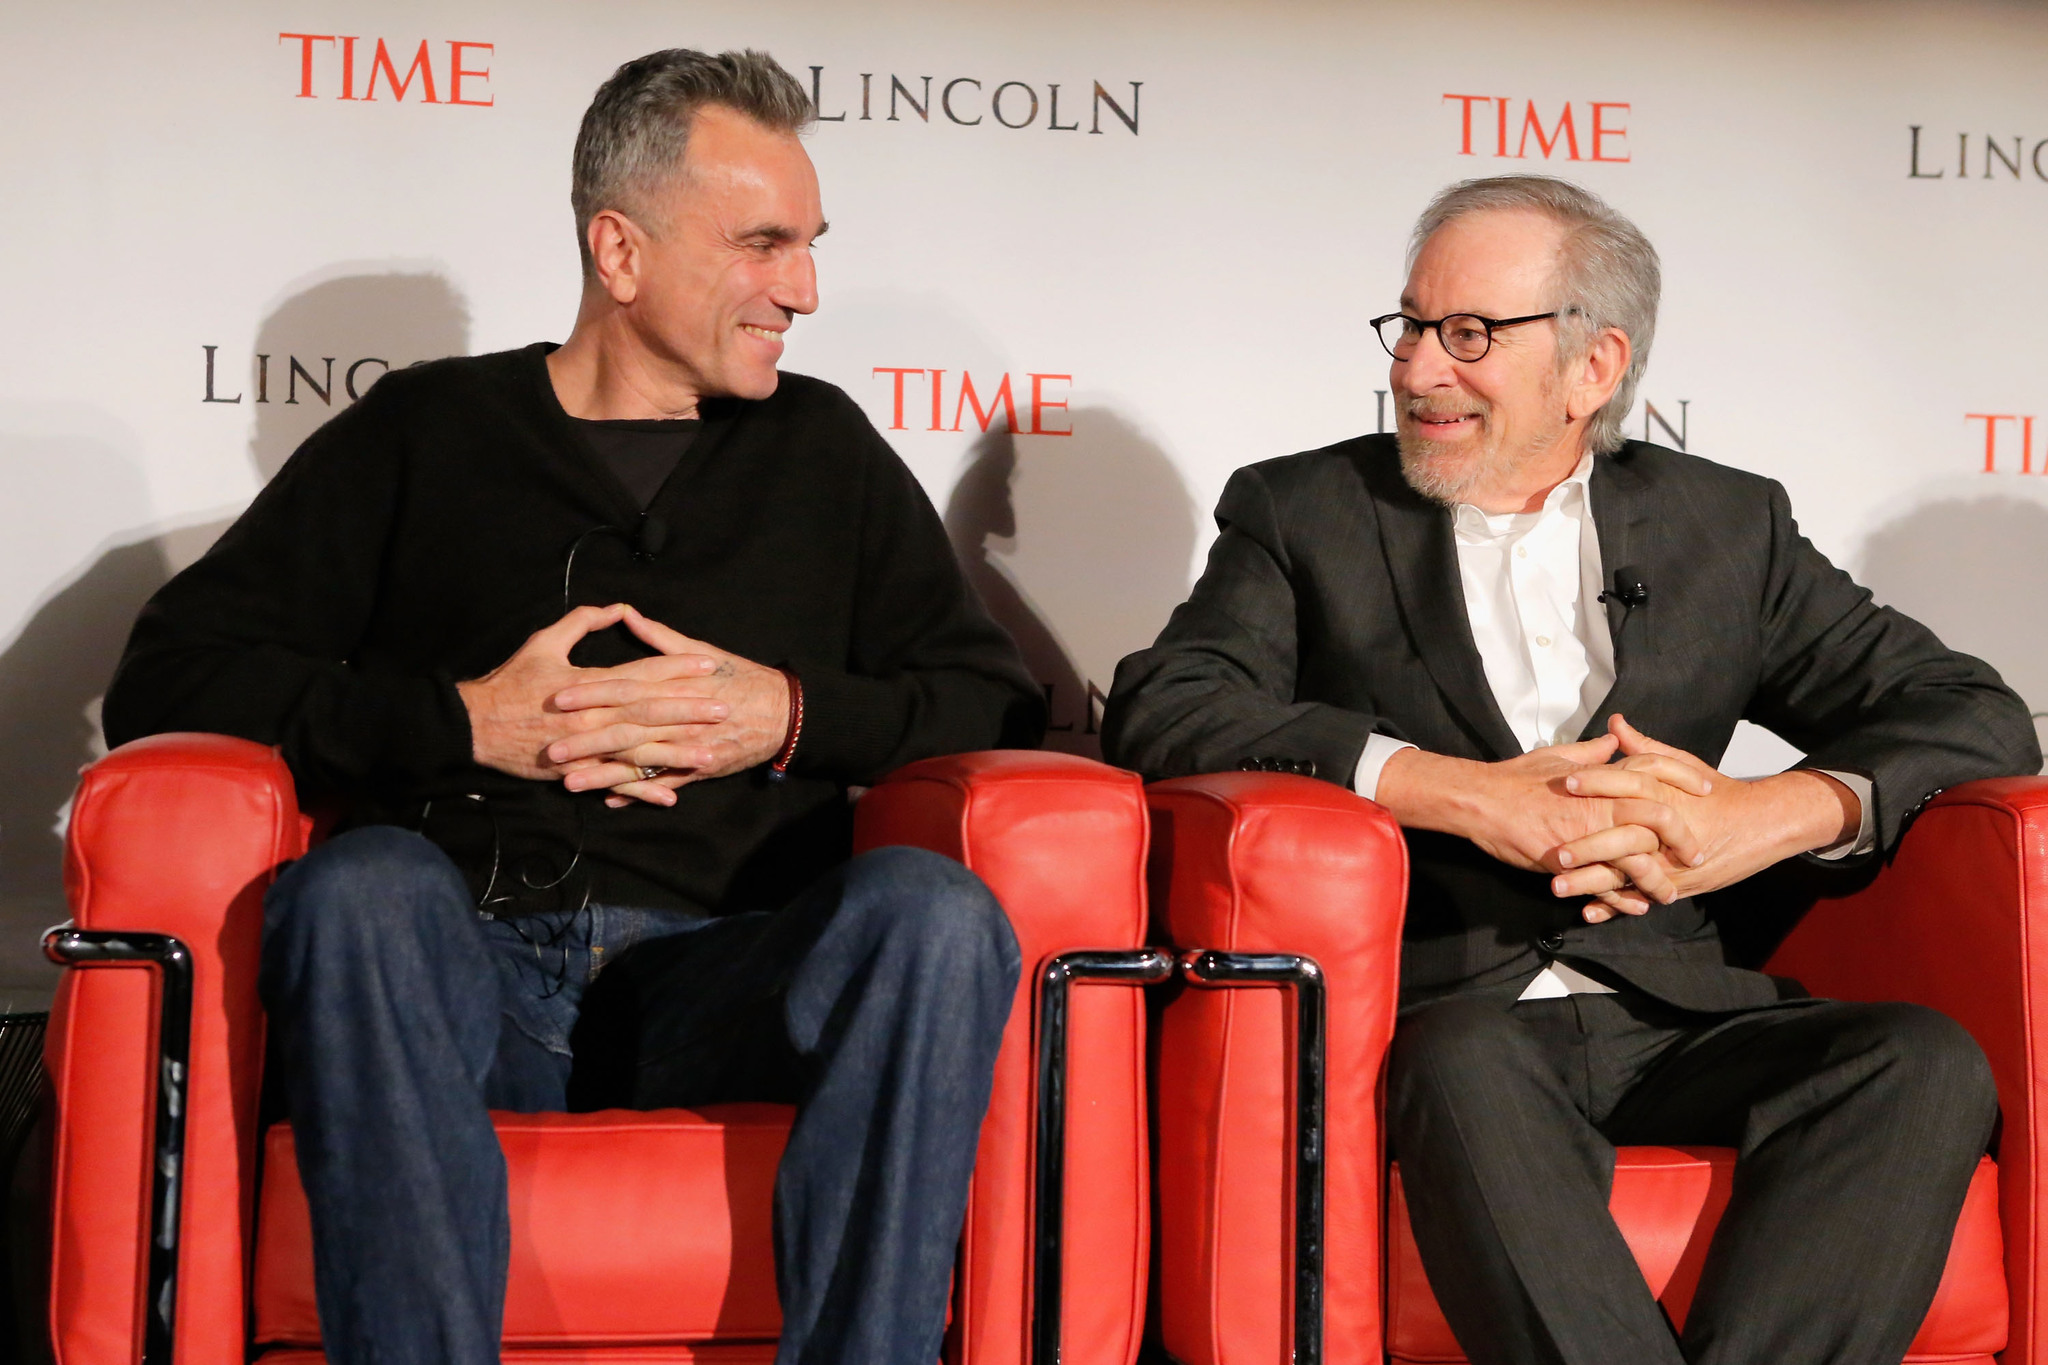 Steven Spielberg and Daniel Day-Lewis at event of Linkolnas (2012)